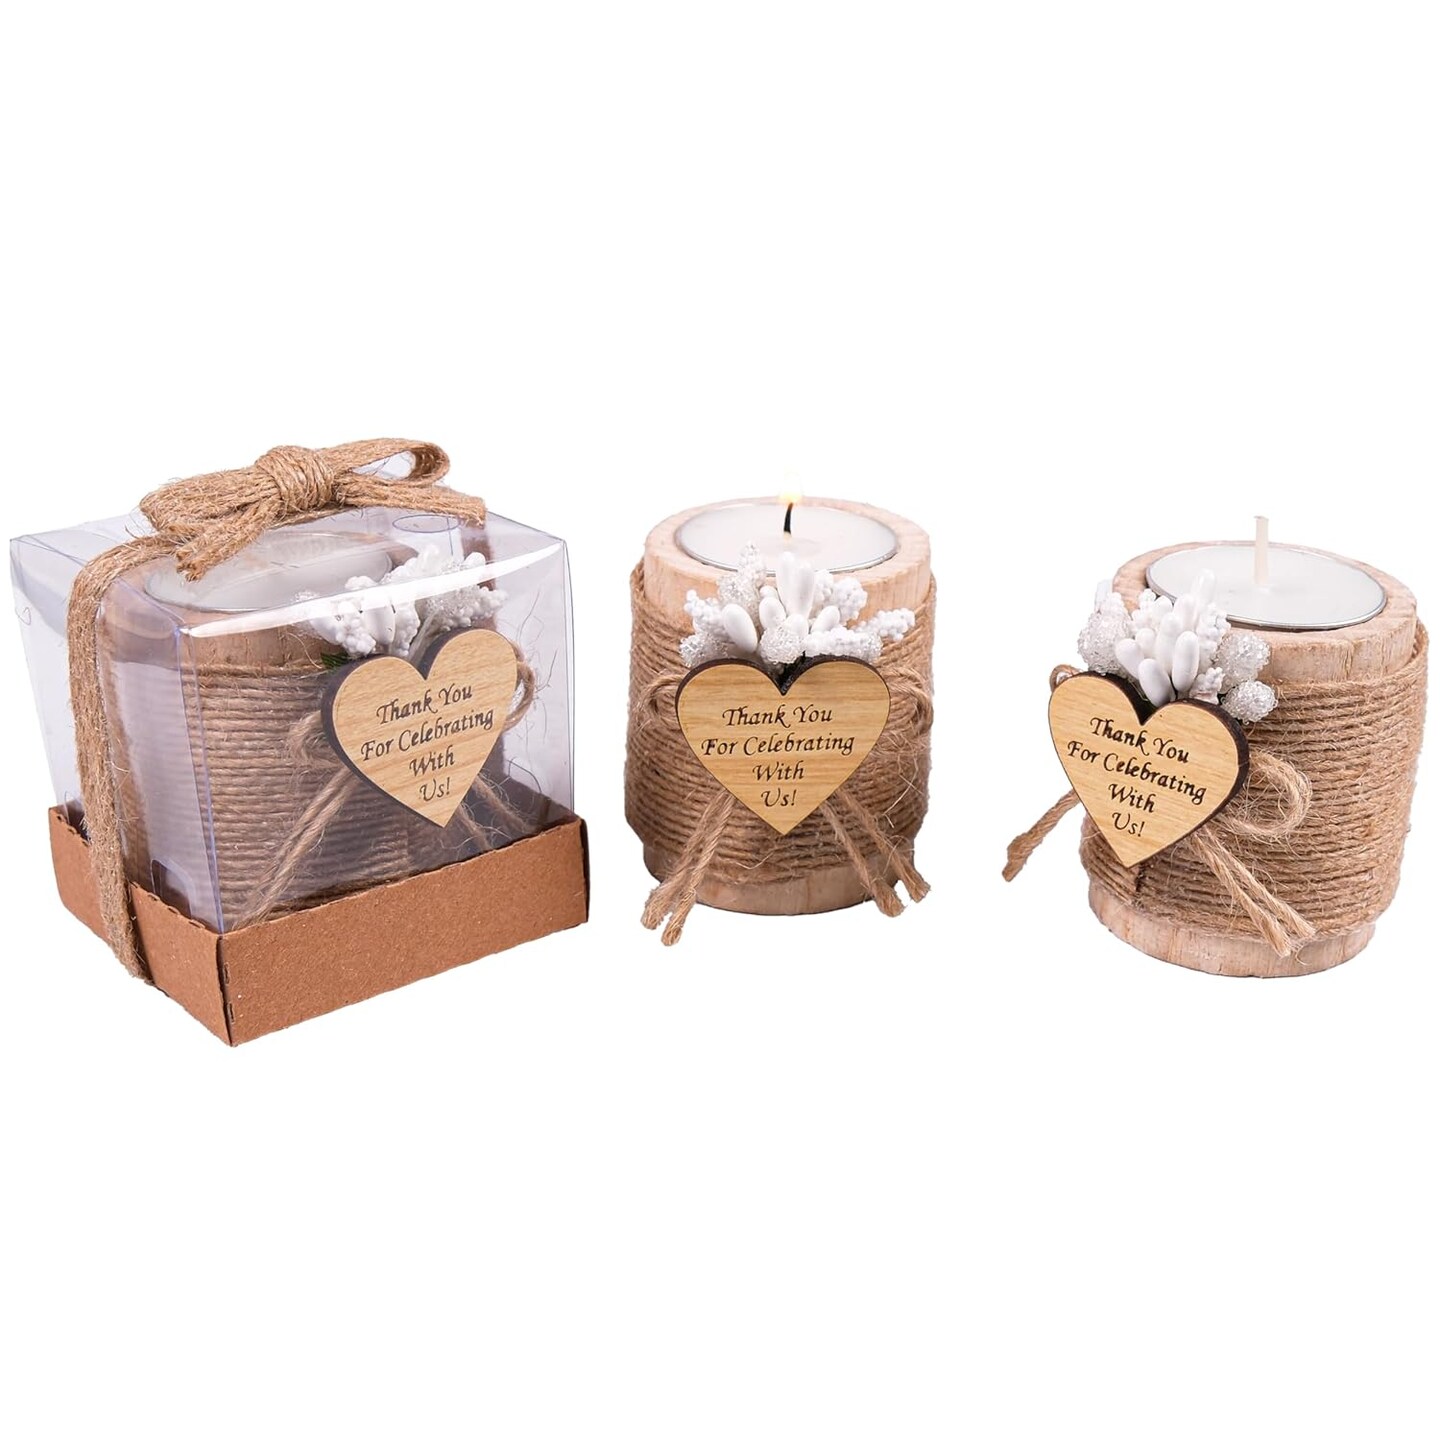 10-Pieces Wood Tealight Candle Holders